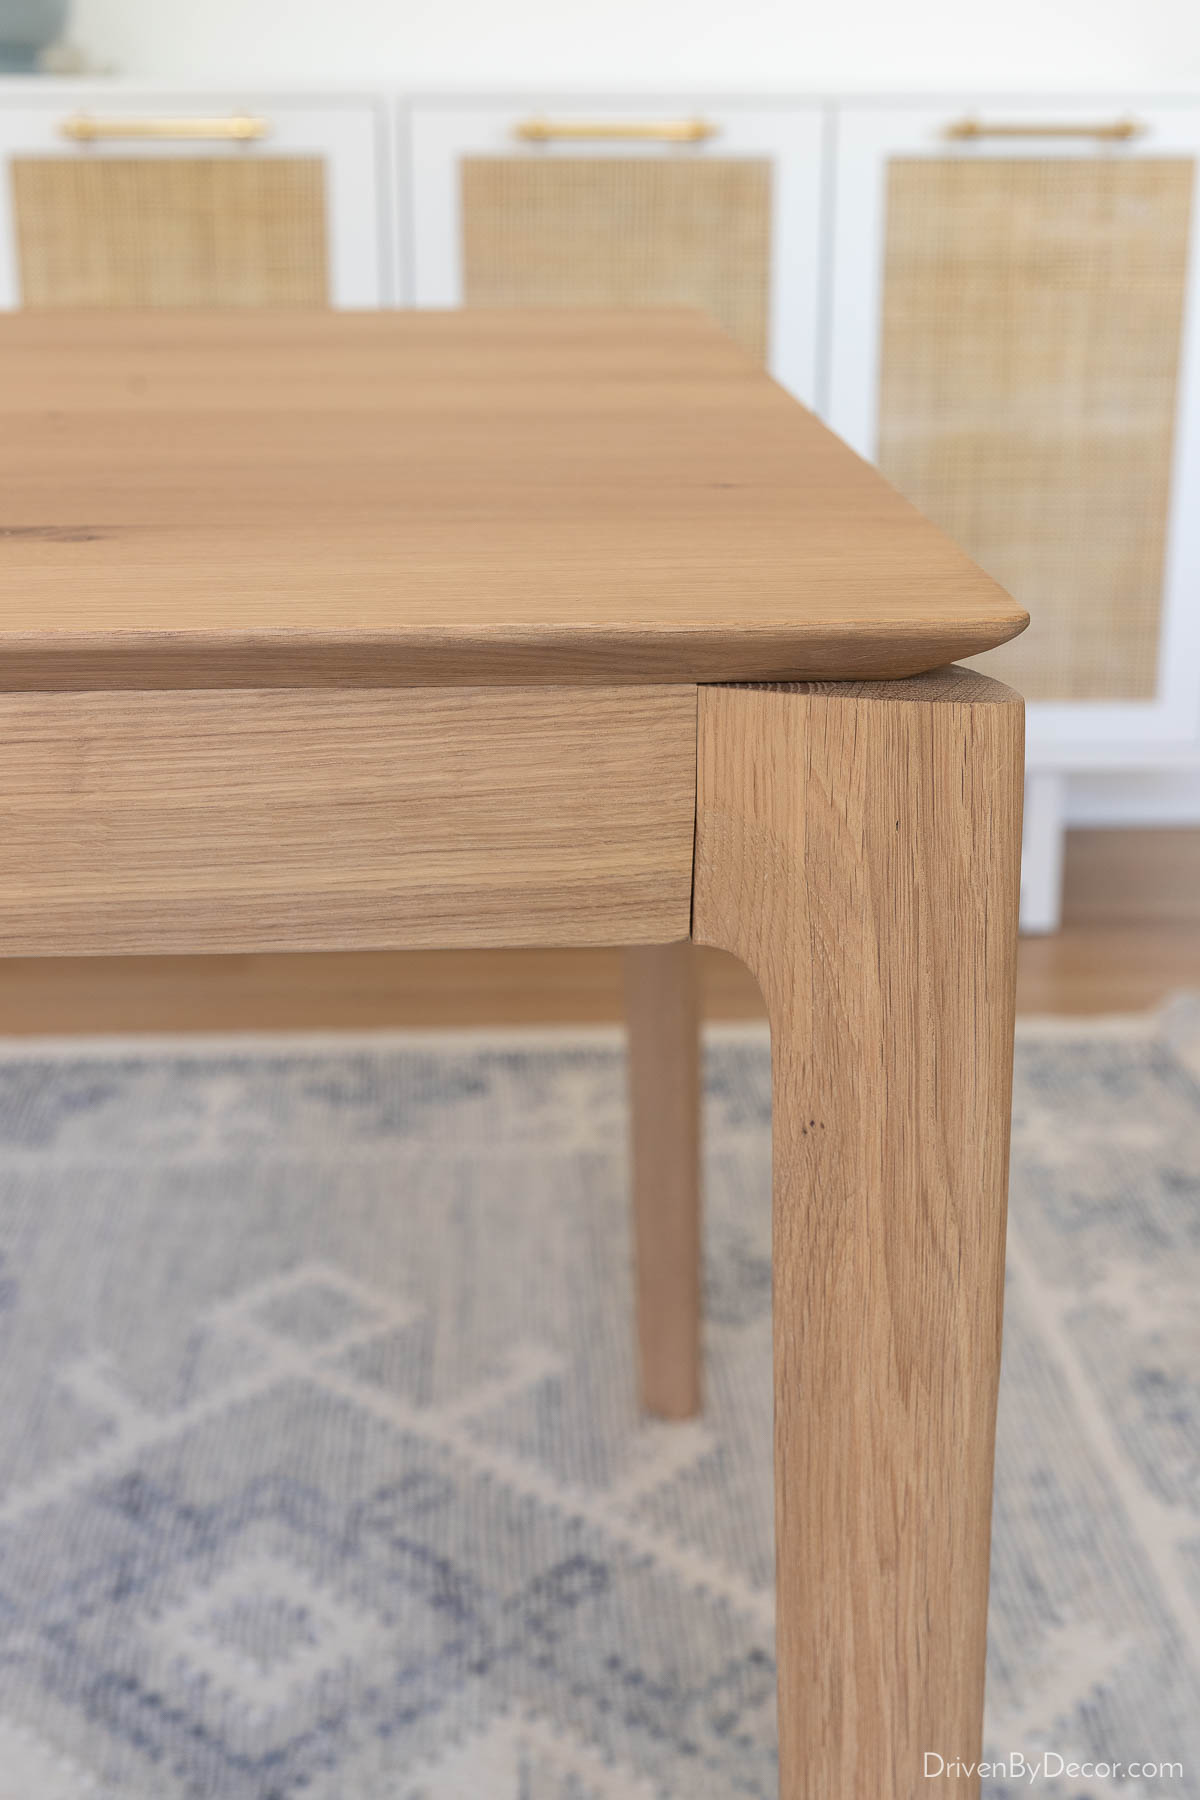 The profile of our oak dining room table